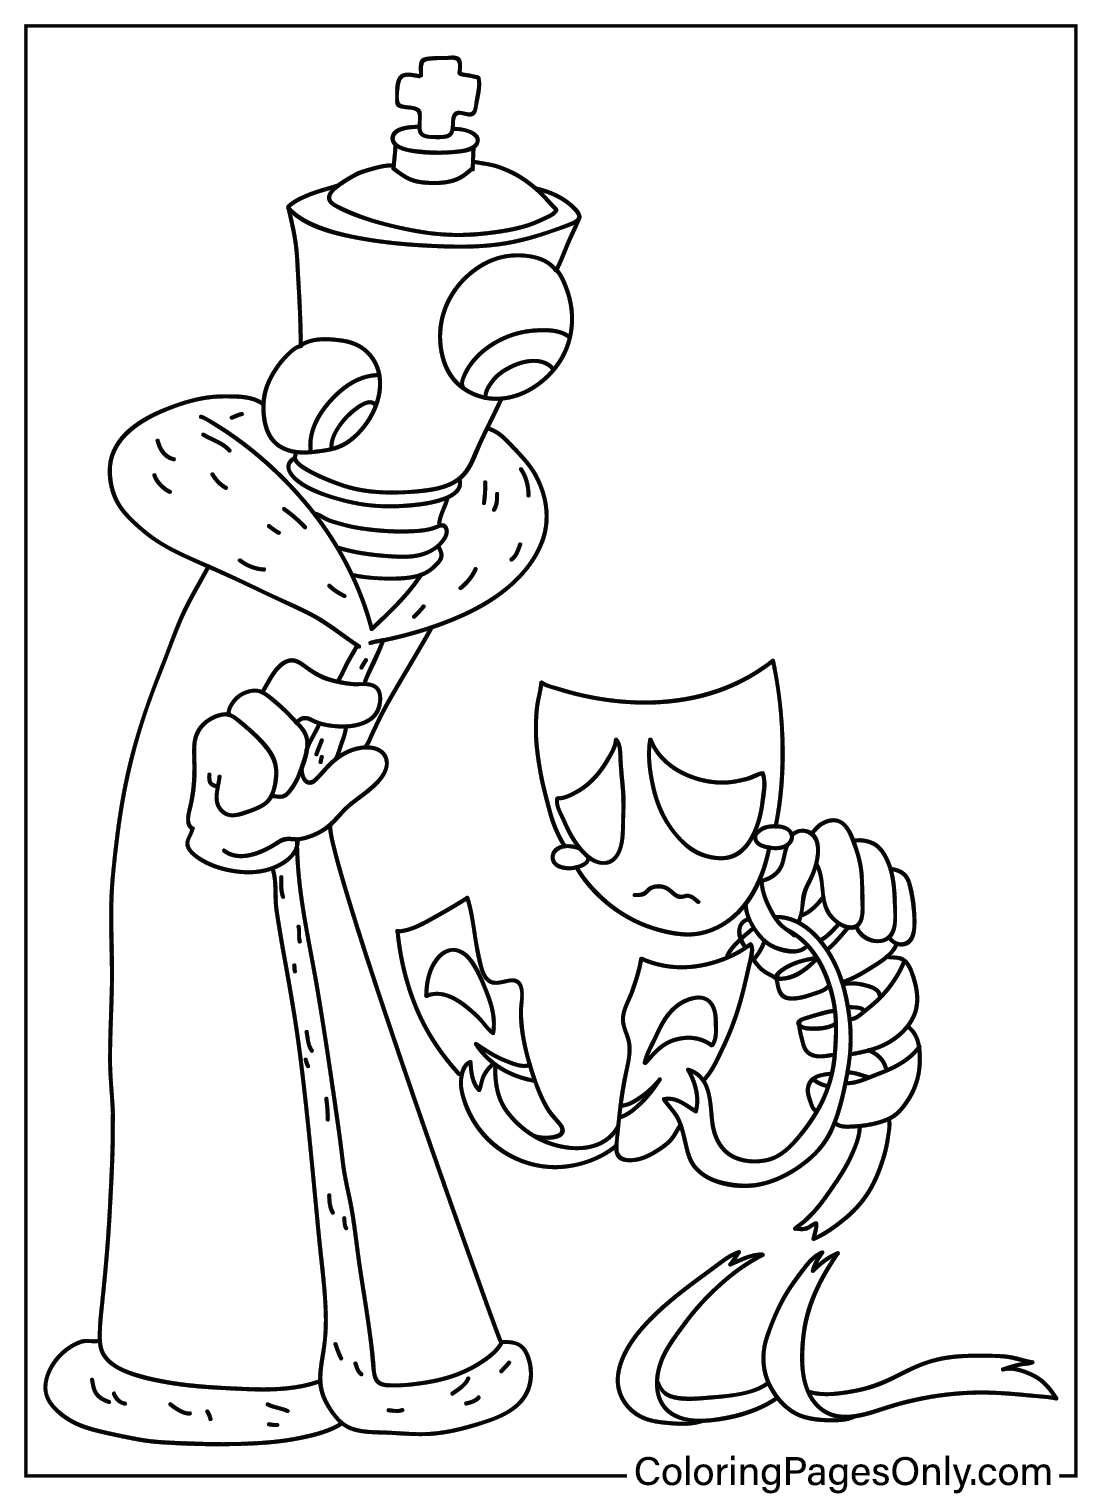 Kinger, Gangle Coloring Page from Gangle